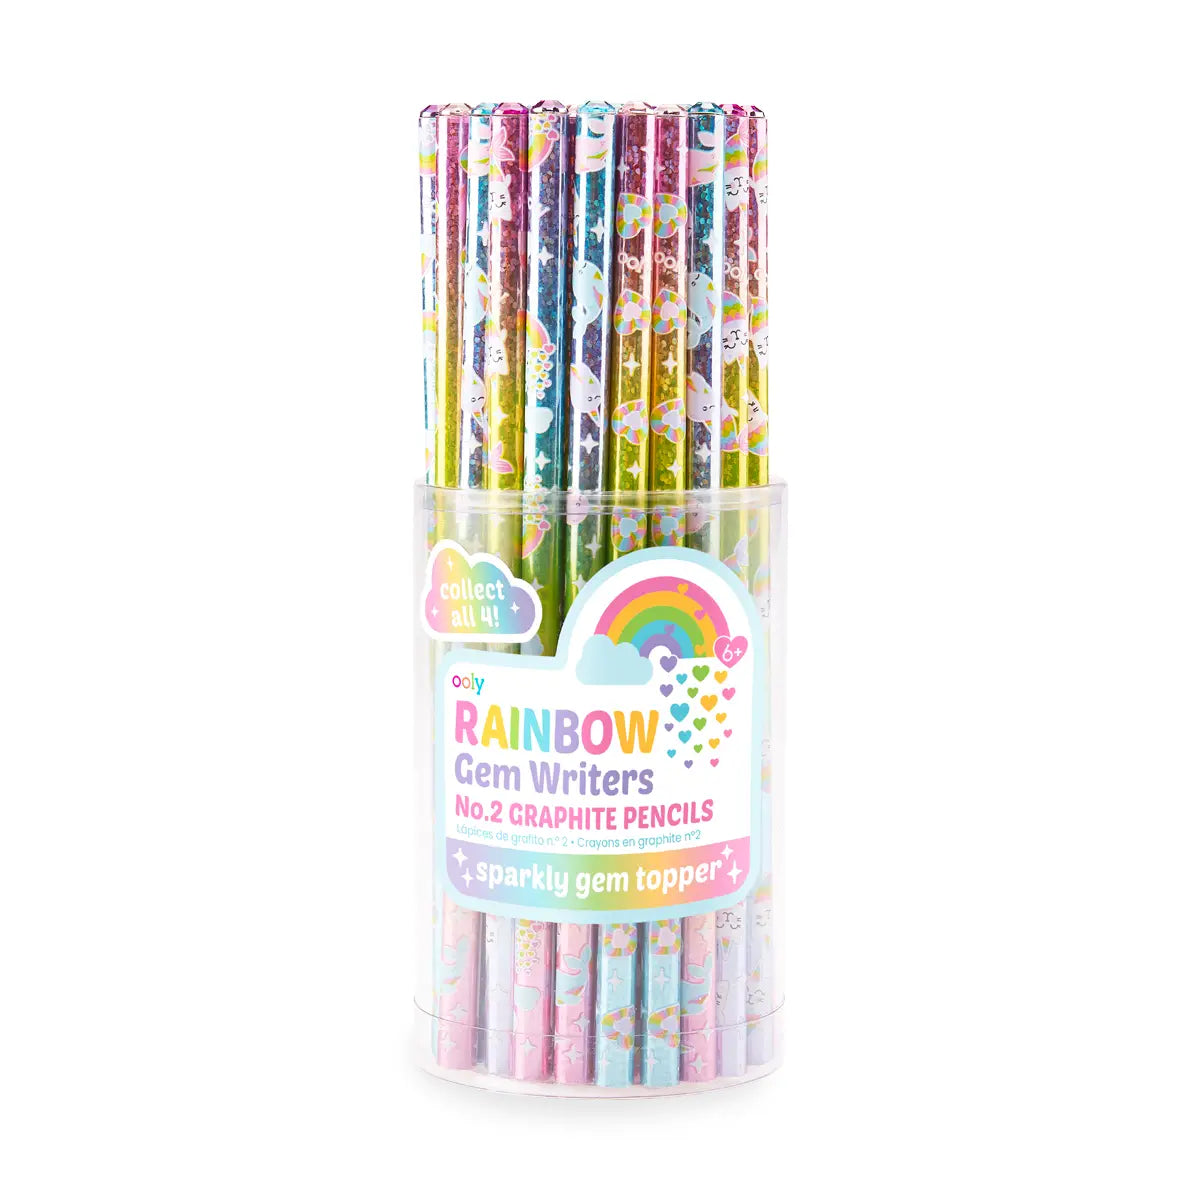 Ooly Lil Juicy Scented Graphite Pencils - Blueberry - Set of 6